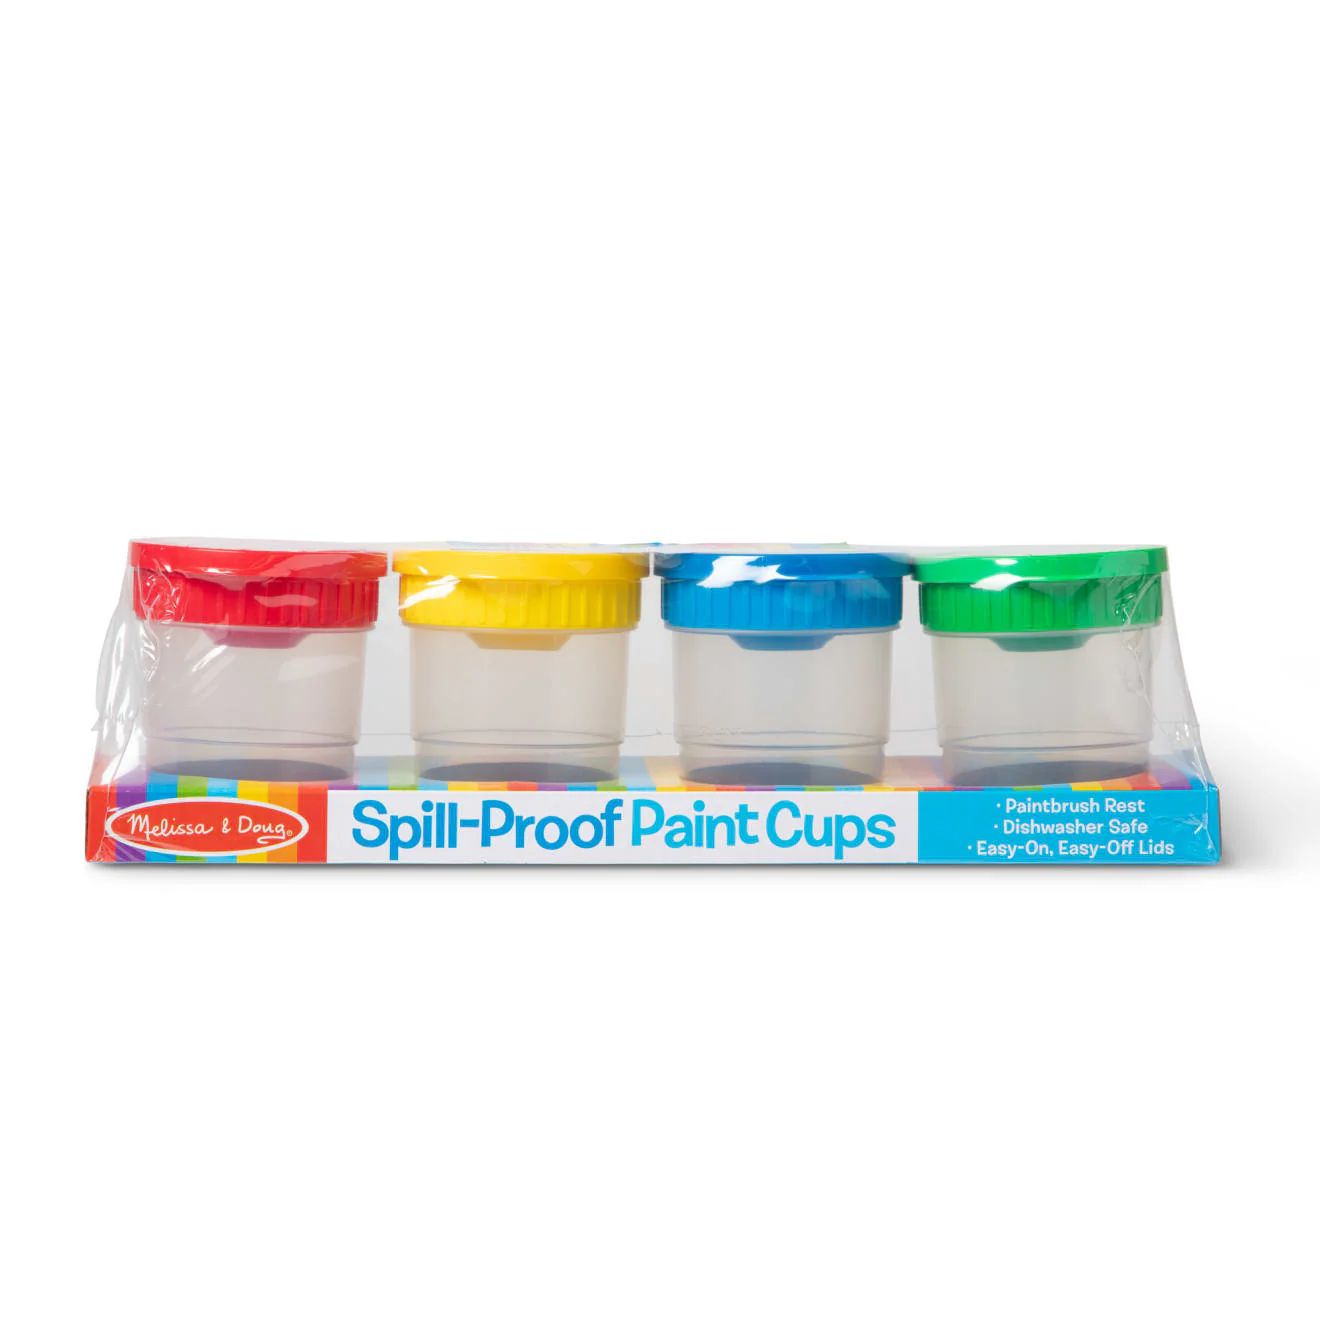 Spill-proof Paint Cups | Melissa and Doug